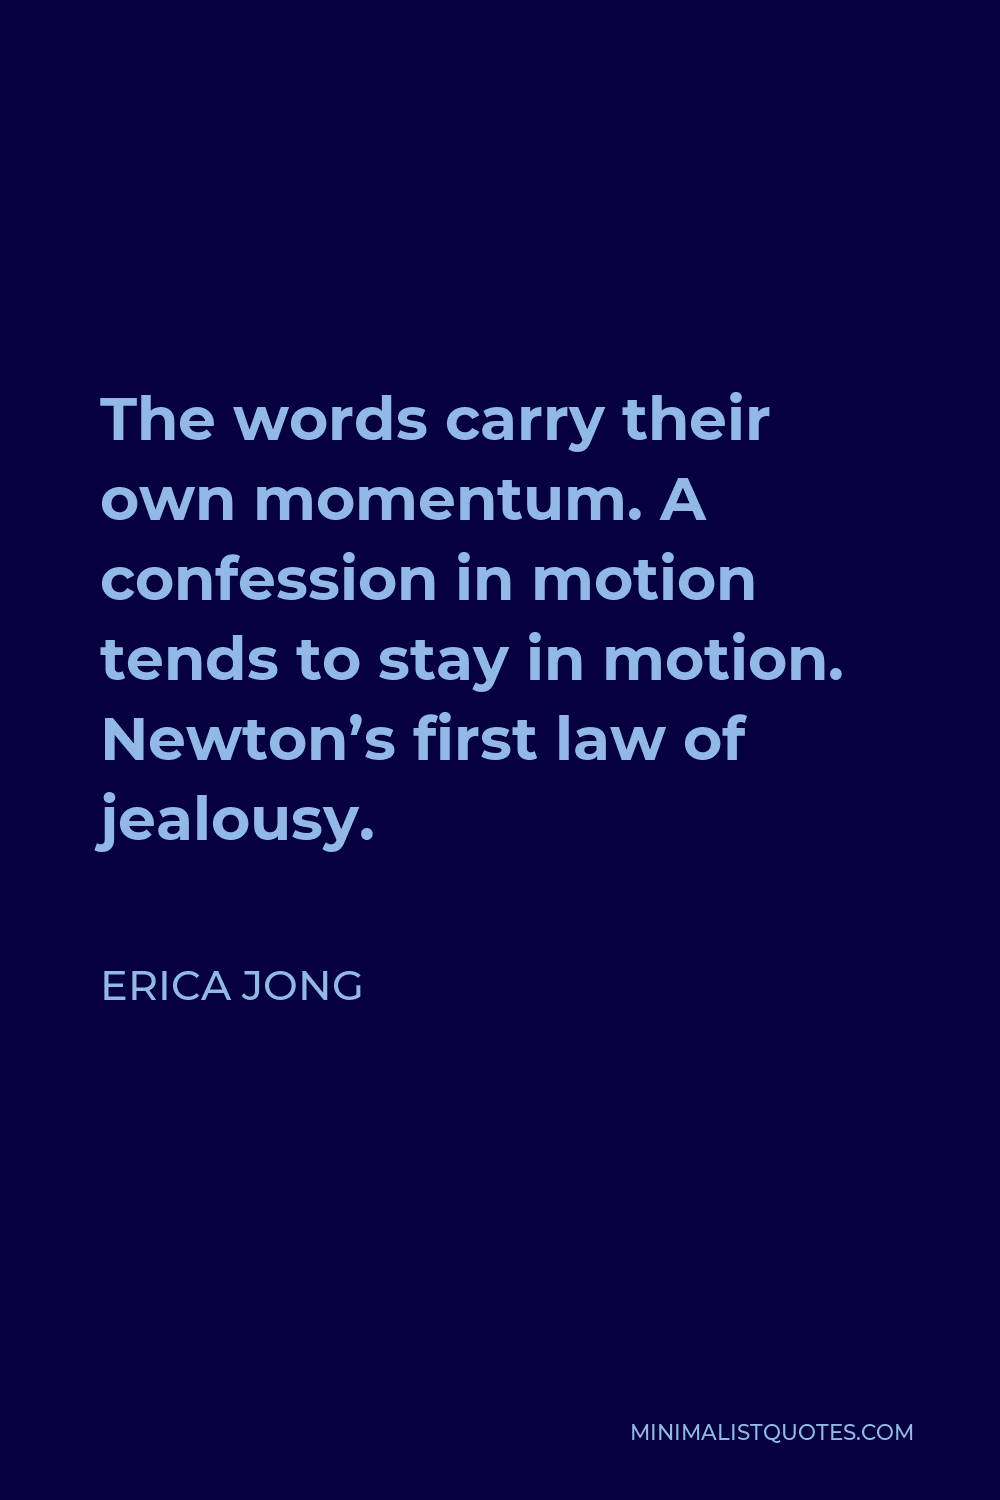 Erica Jong Quote - The words carry their own momentum. A confession in motion tends to stay in motion. Newton’s first law of jealousy.